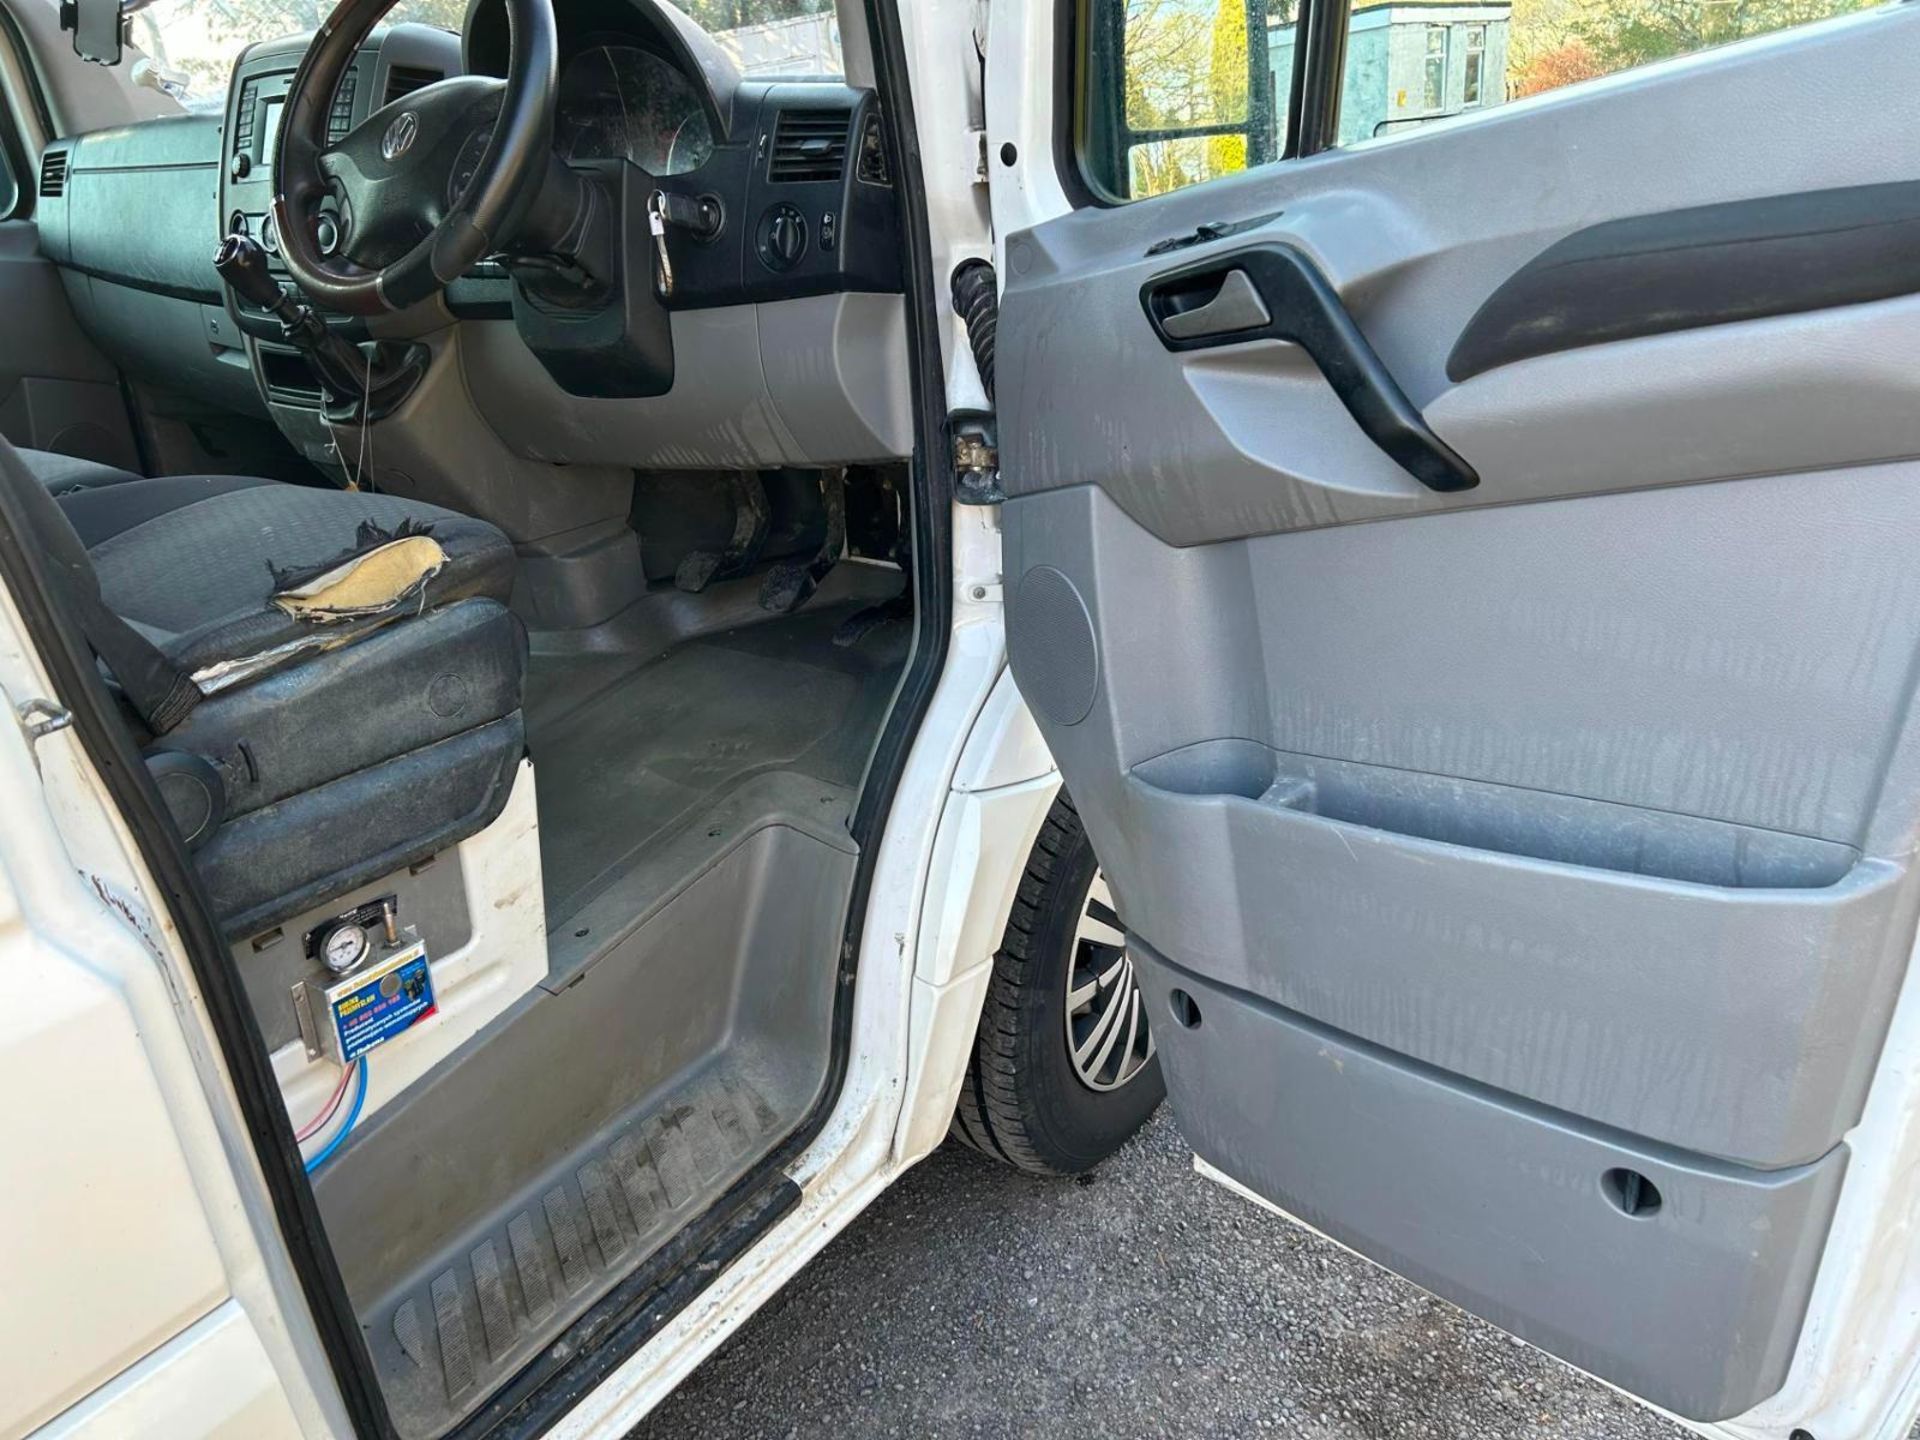 2014 VOLKSWAGEN CRAFTER CR35 TDI 136BHP - RELIABLE LONG WHEEL BASE 17FT RECOVERY VEHICLE - Image 4 of 16